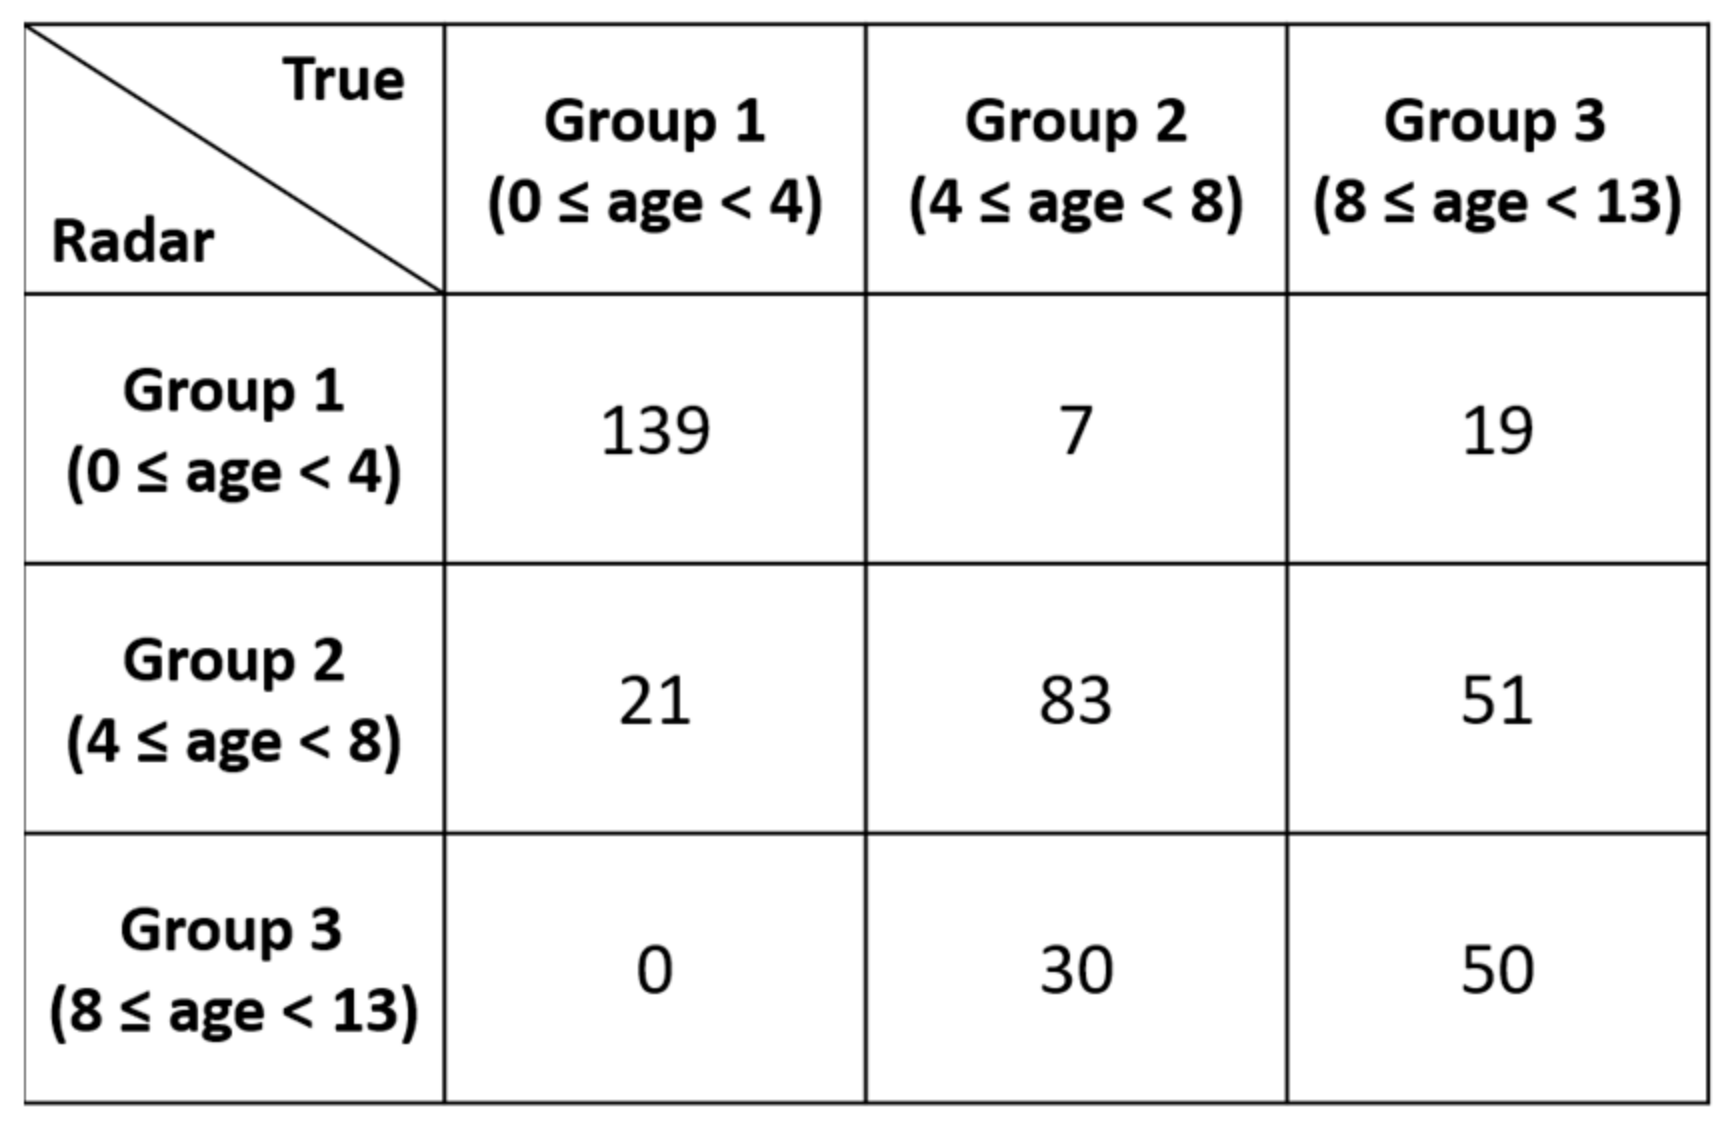 age group classification